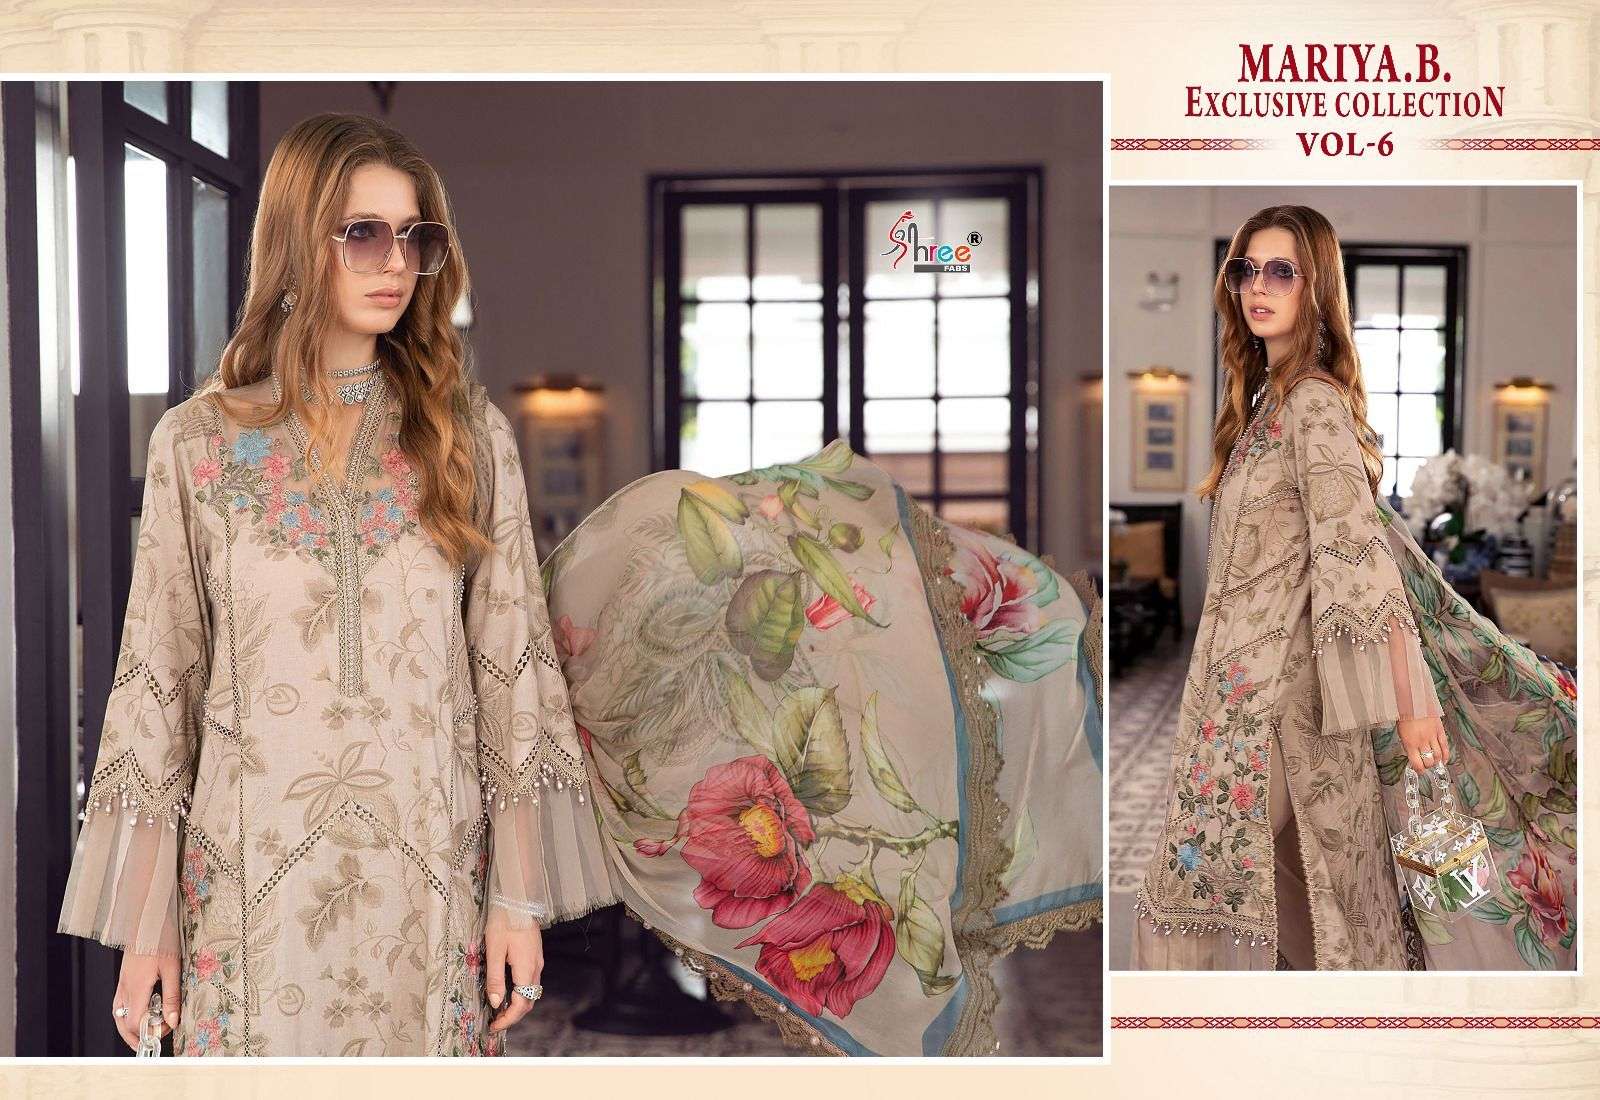 shree fabs maria b exclusive collection vol 6 cotton catchy look salwar suit silver dupatta  catalog